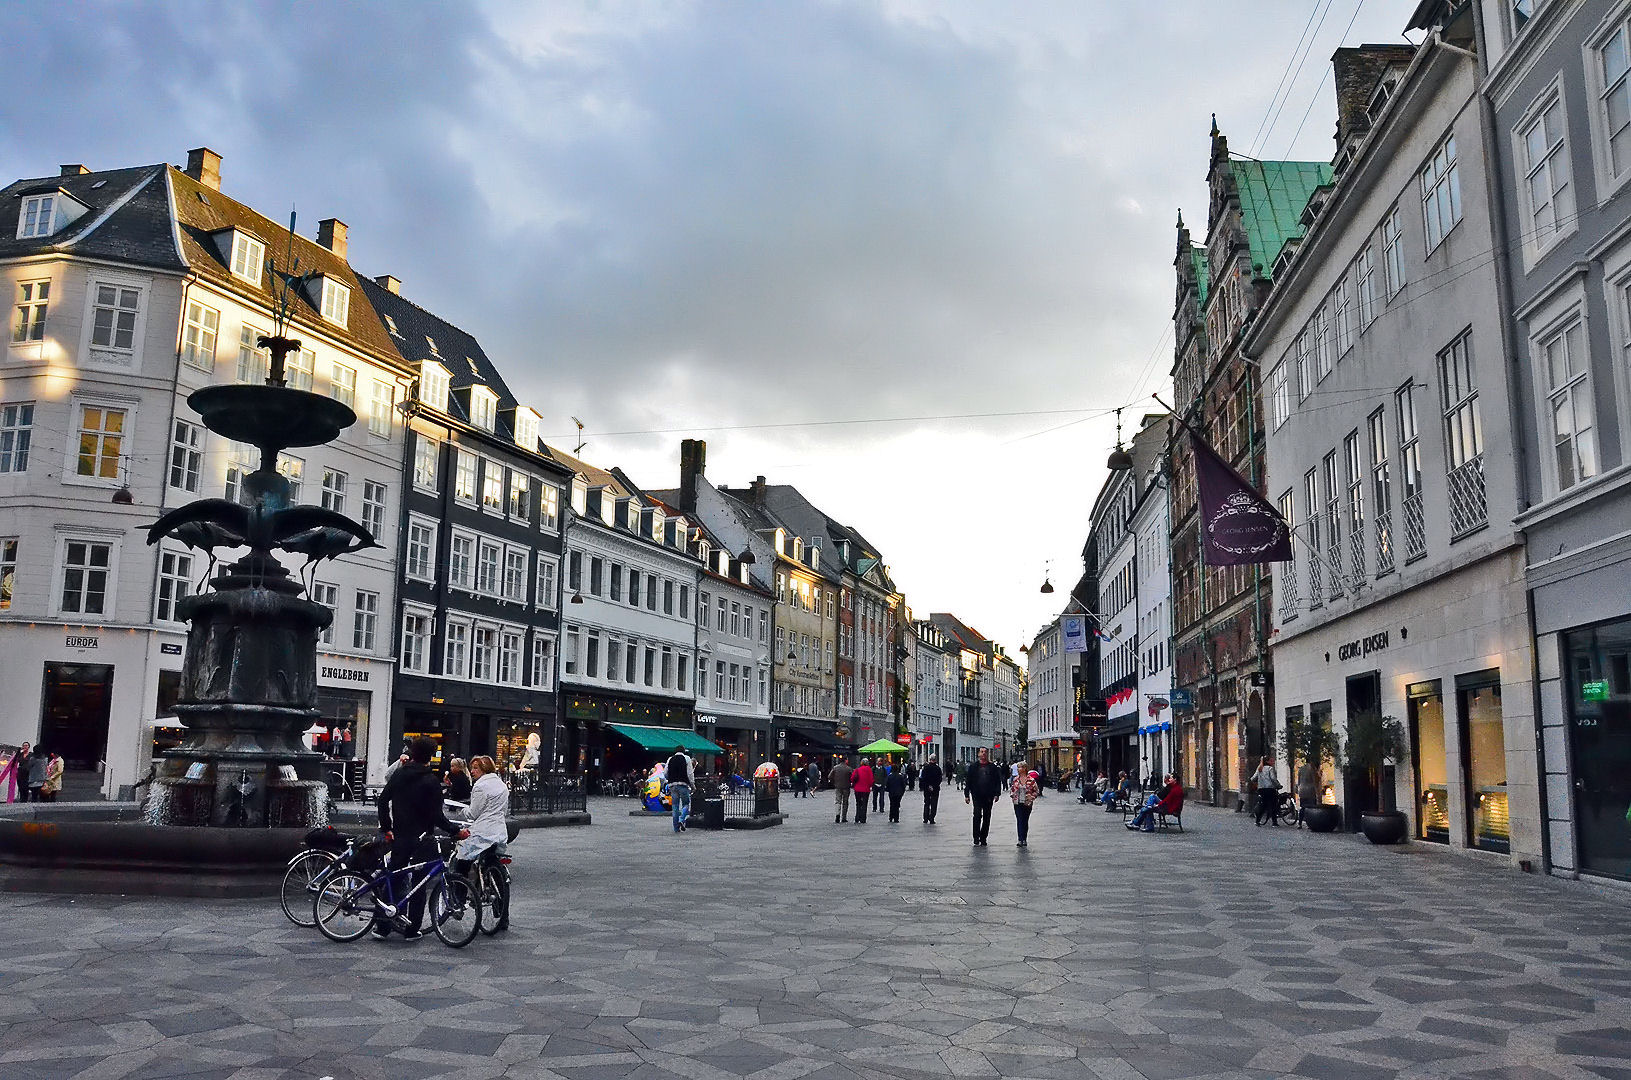 Things to do for free in Copenhagen